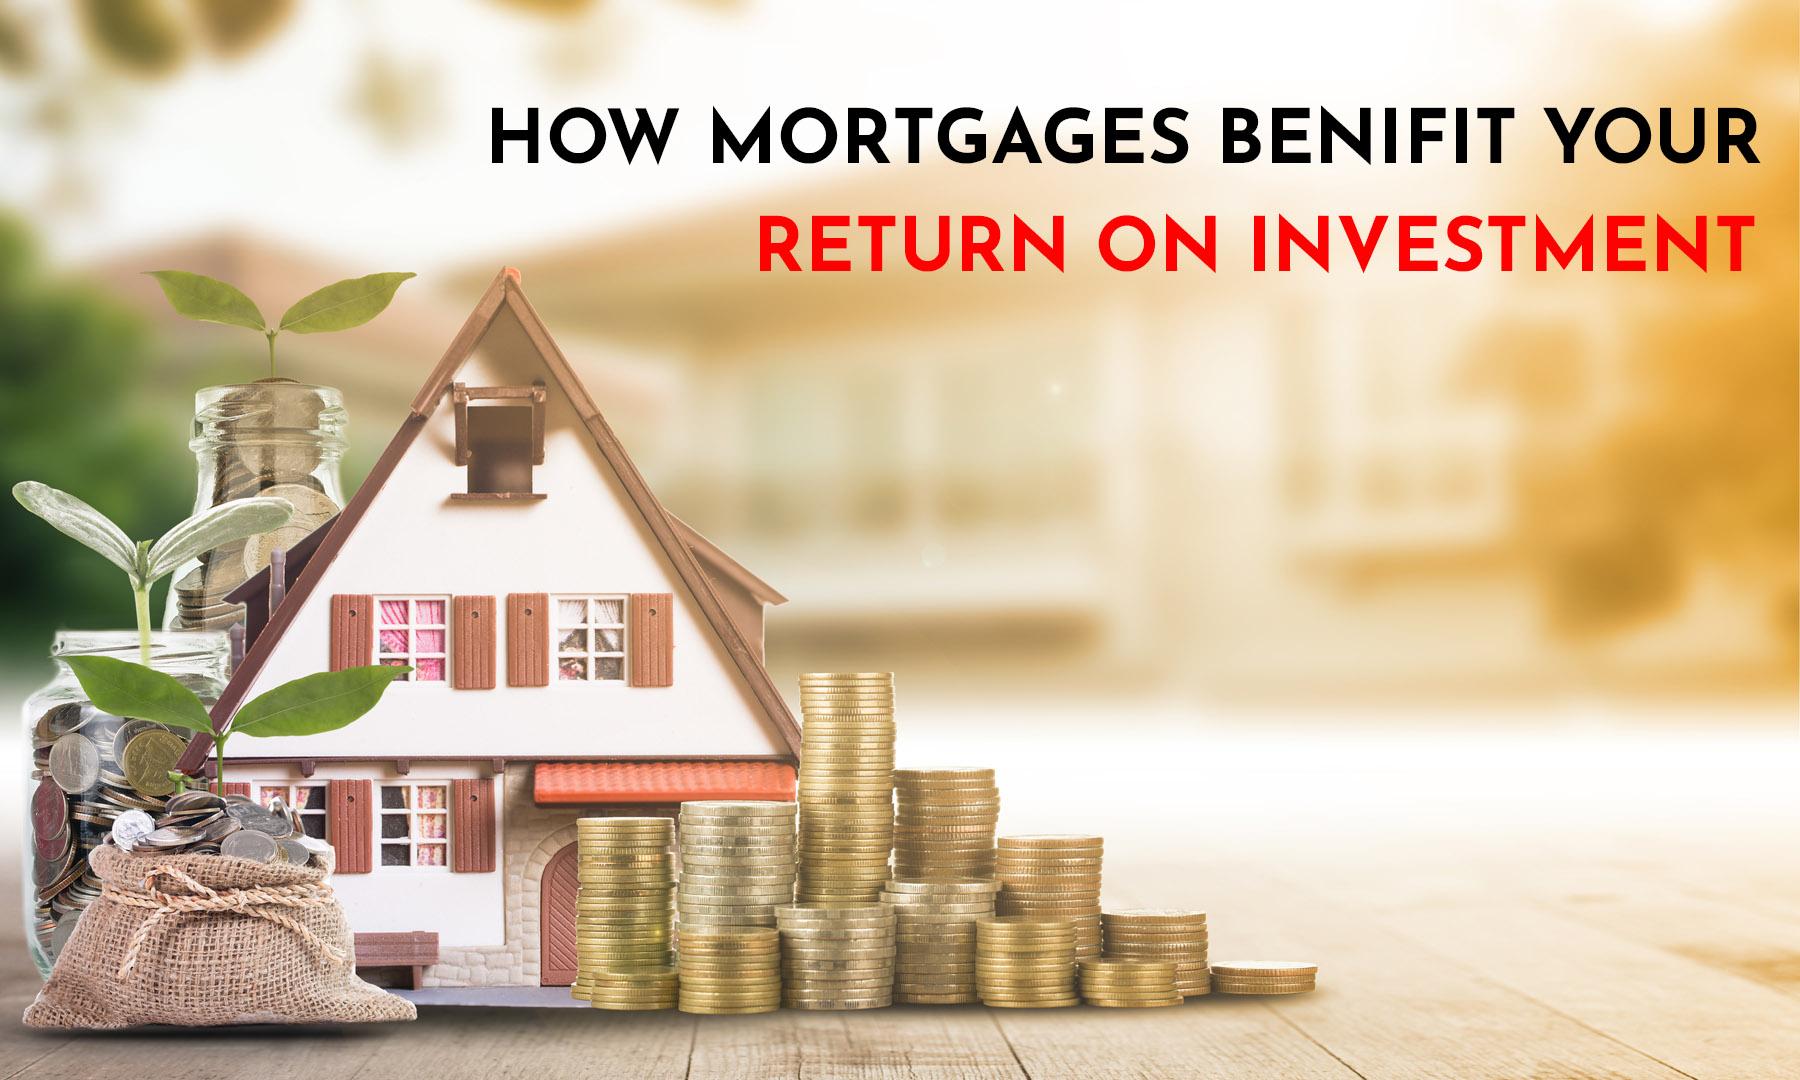 HOW MORTGAGES BENIFIT YOUR RETURN ON INVESTEMENT